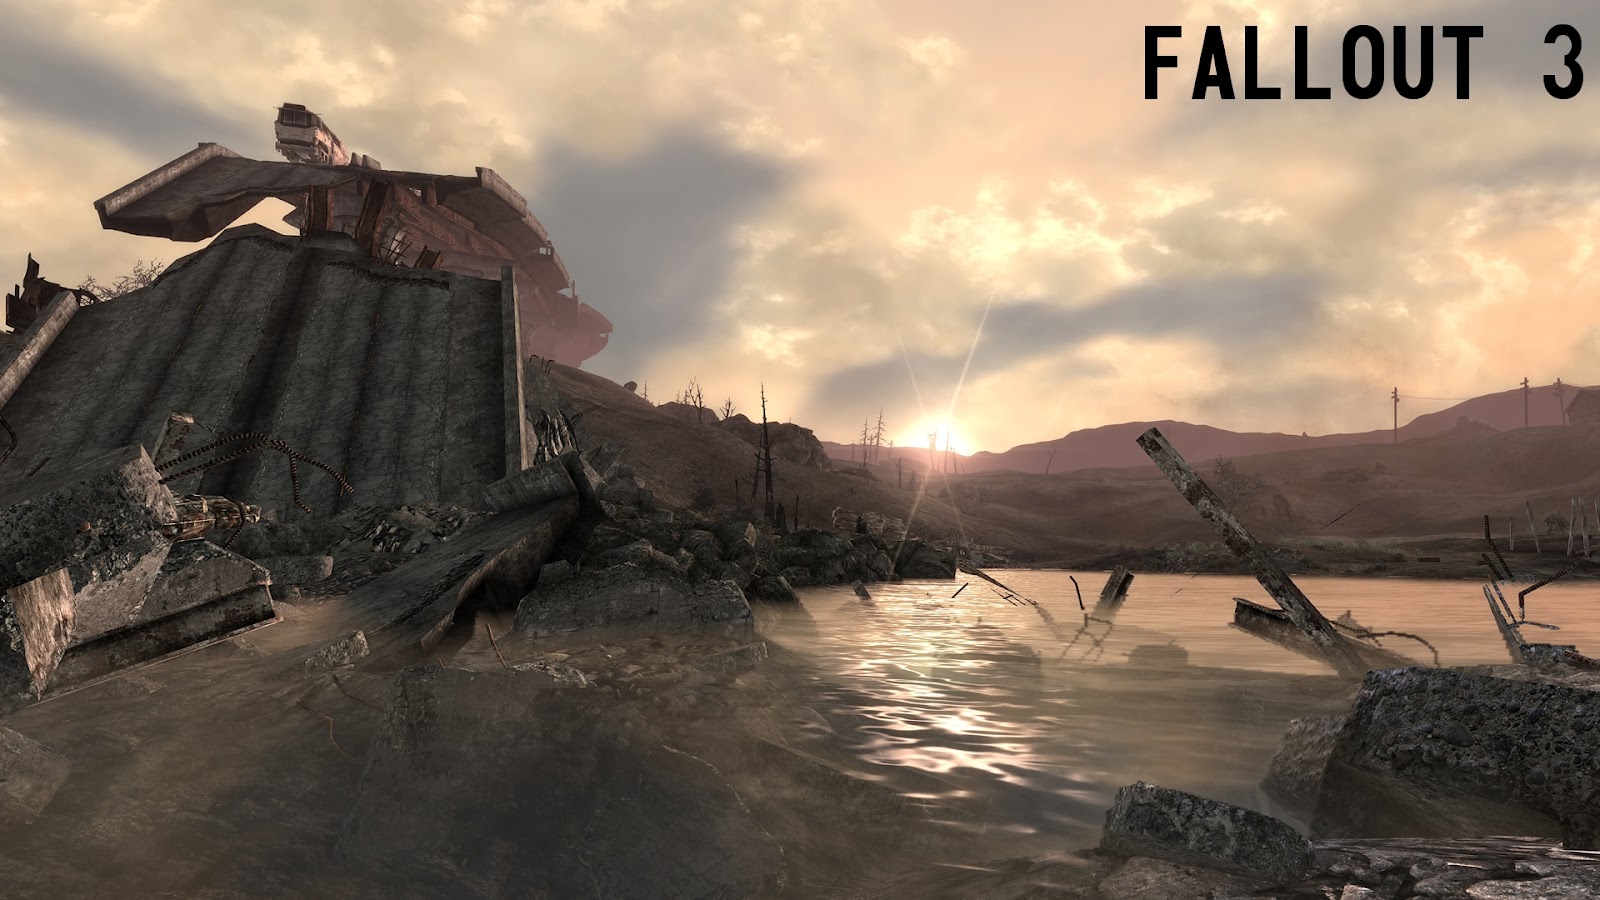 Wallpaper By Jimbobbyjim100 D4lcts7 Fallout In HD 1080p